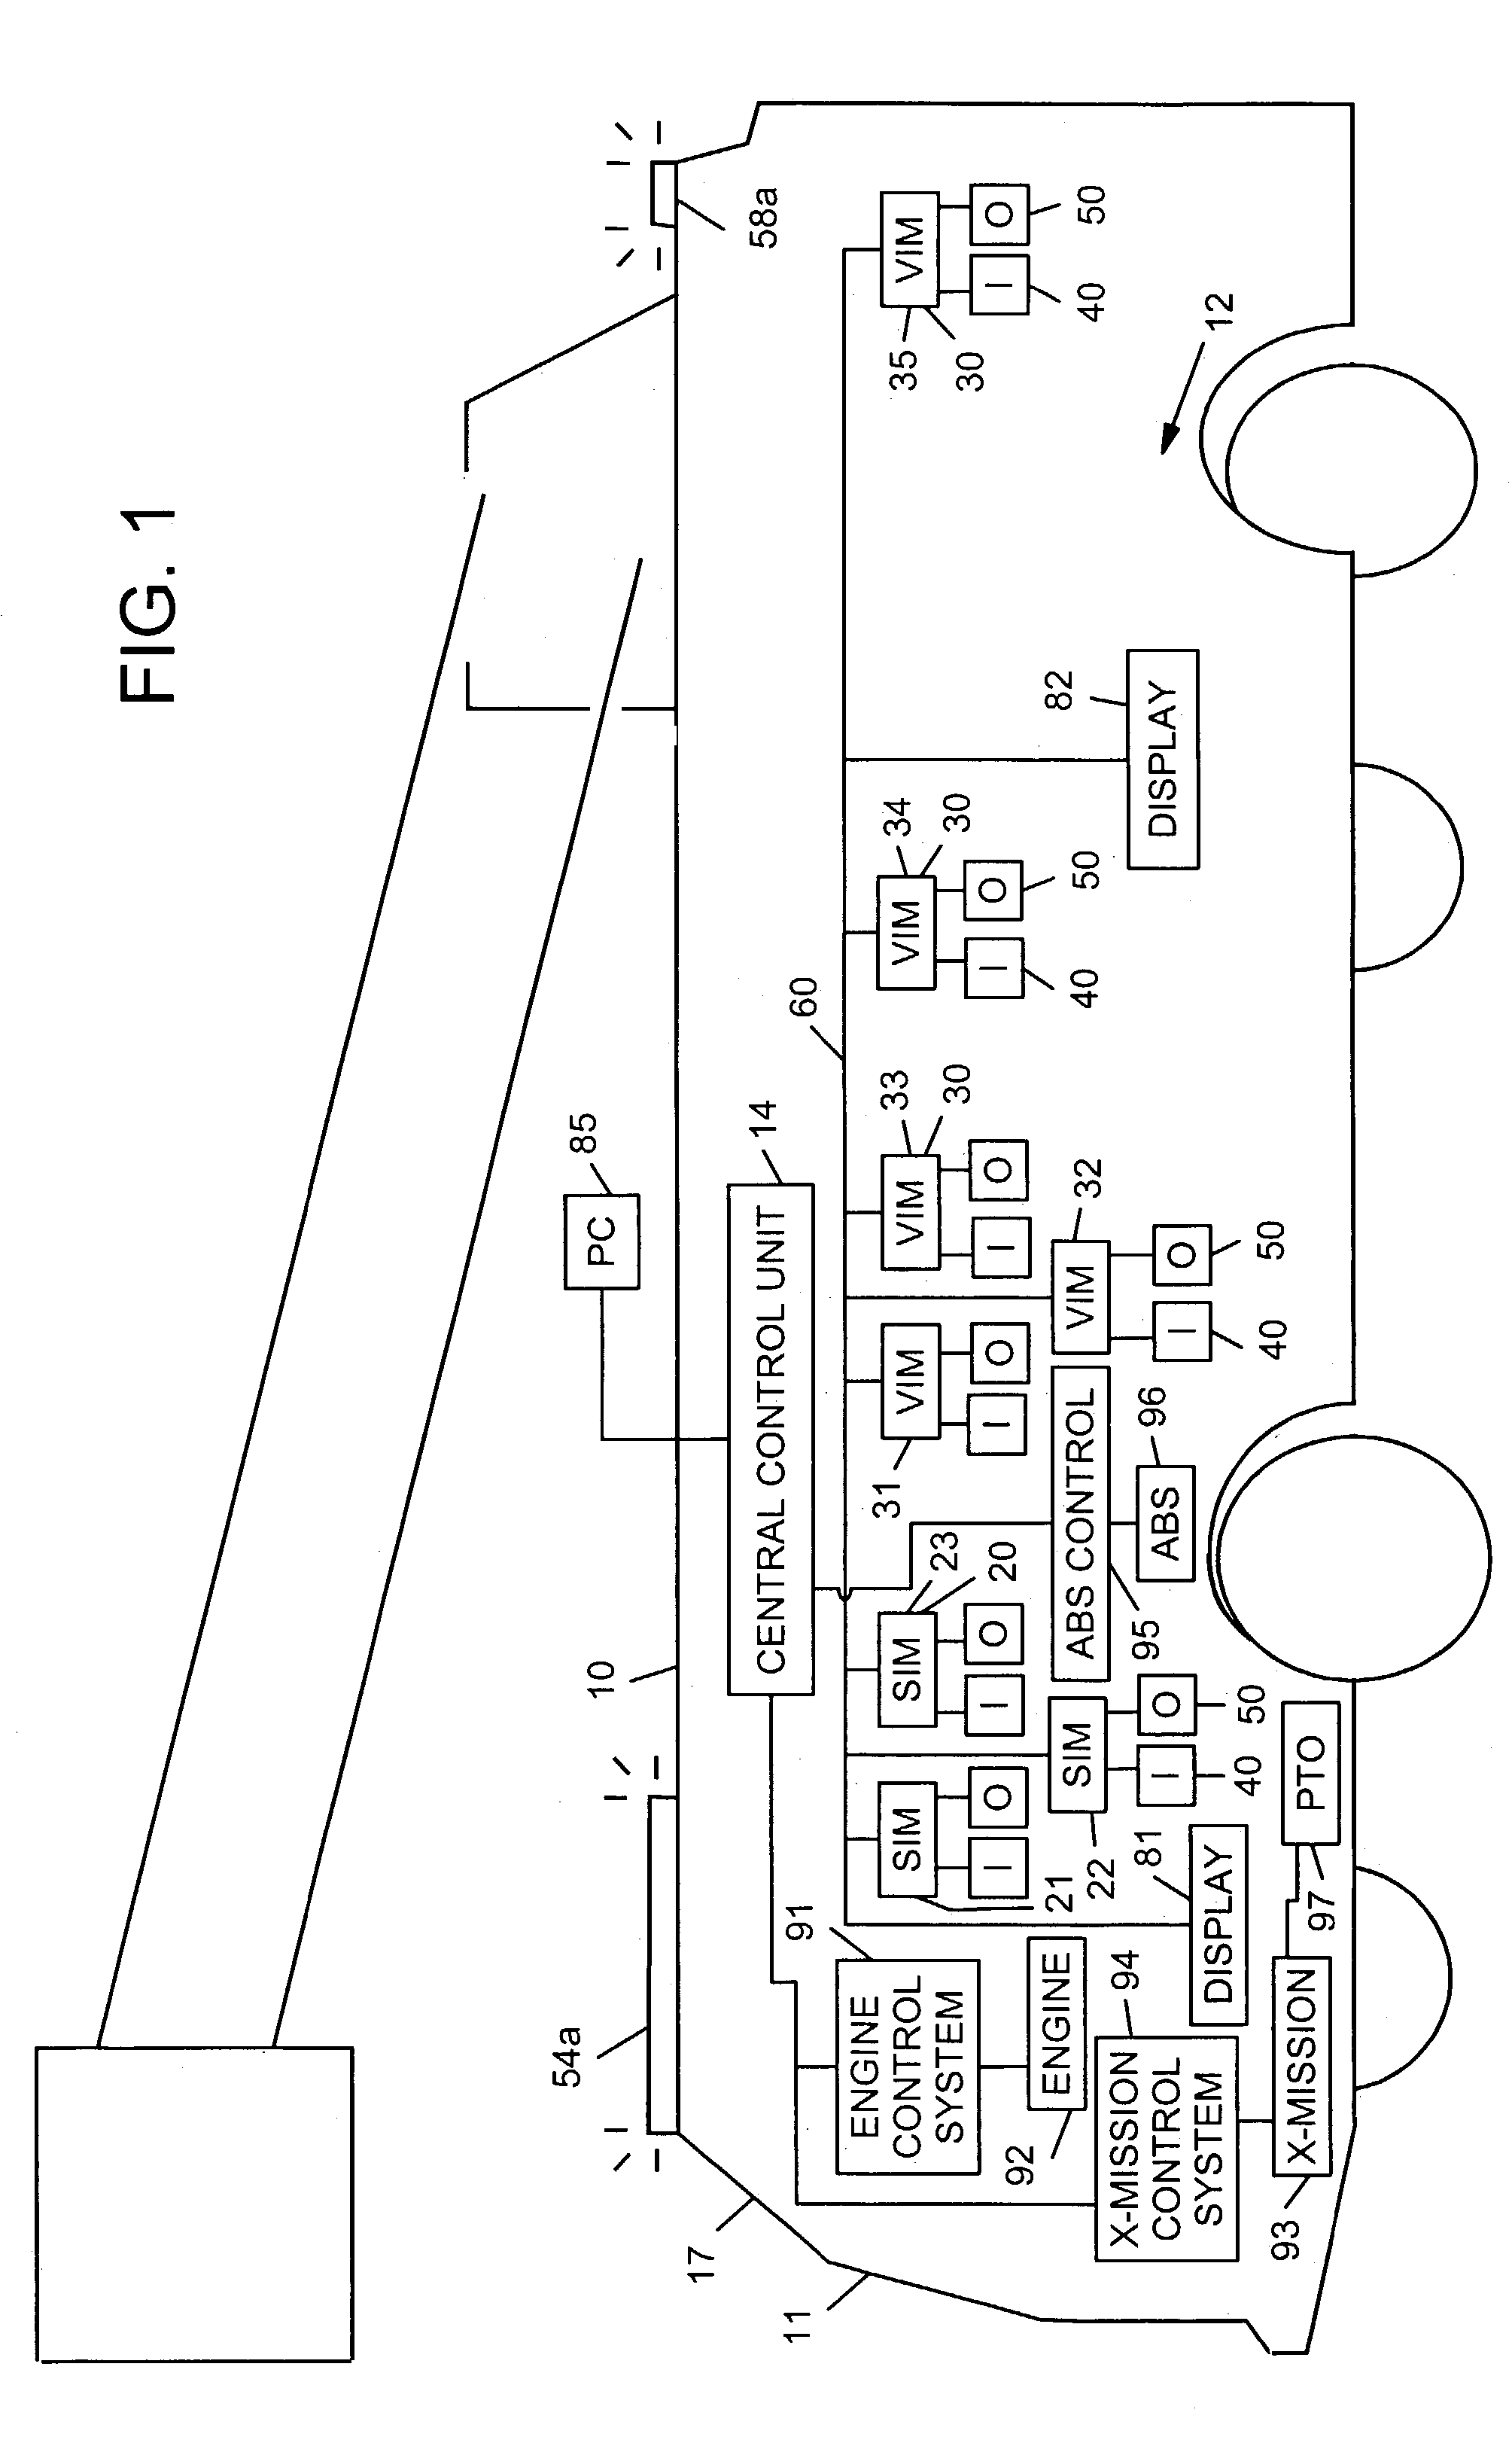 Turret targeting system and method for a fire fighting vehicle